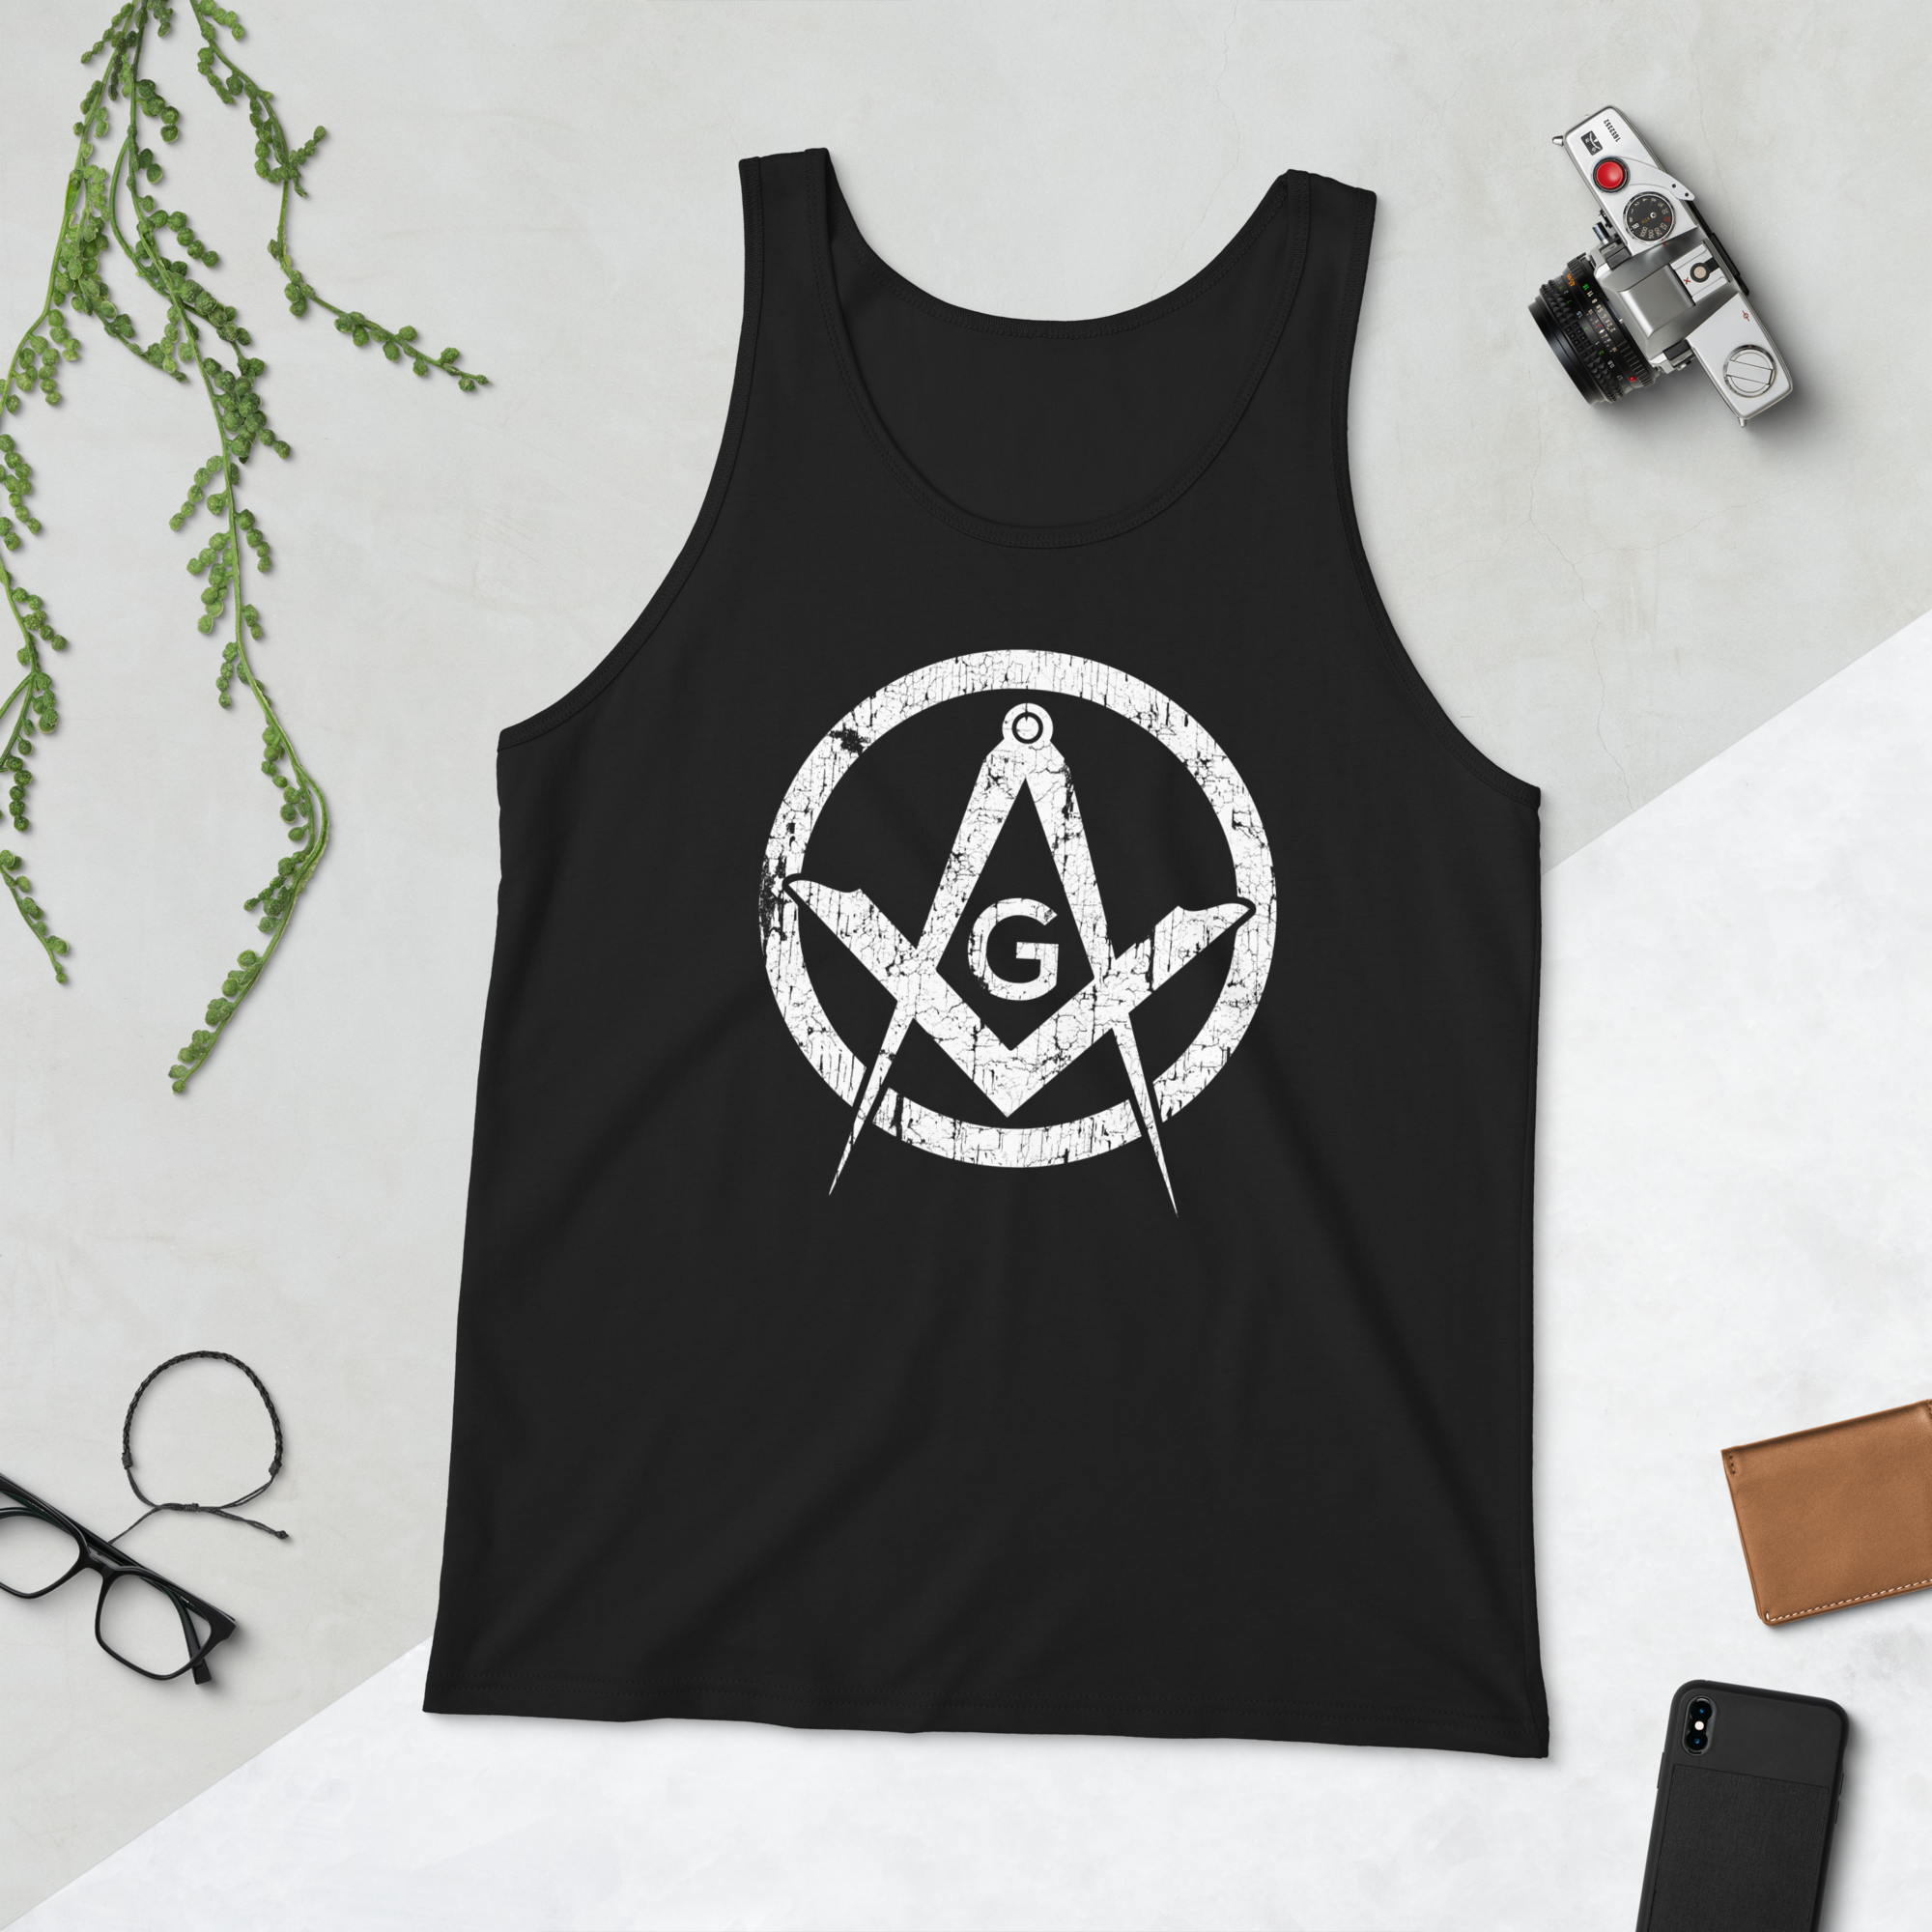 Square and Compass Distressed Tank Top